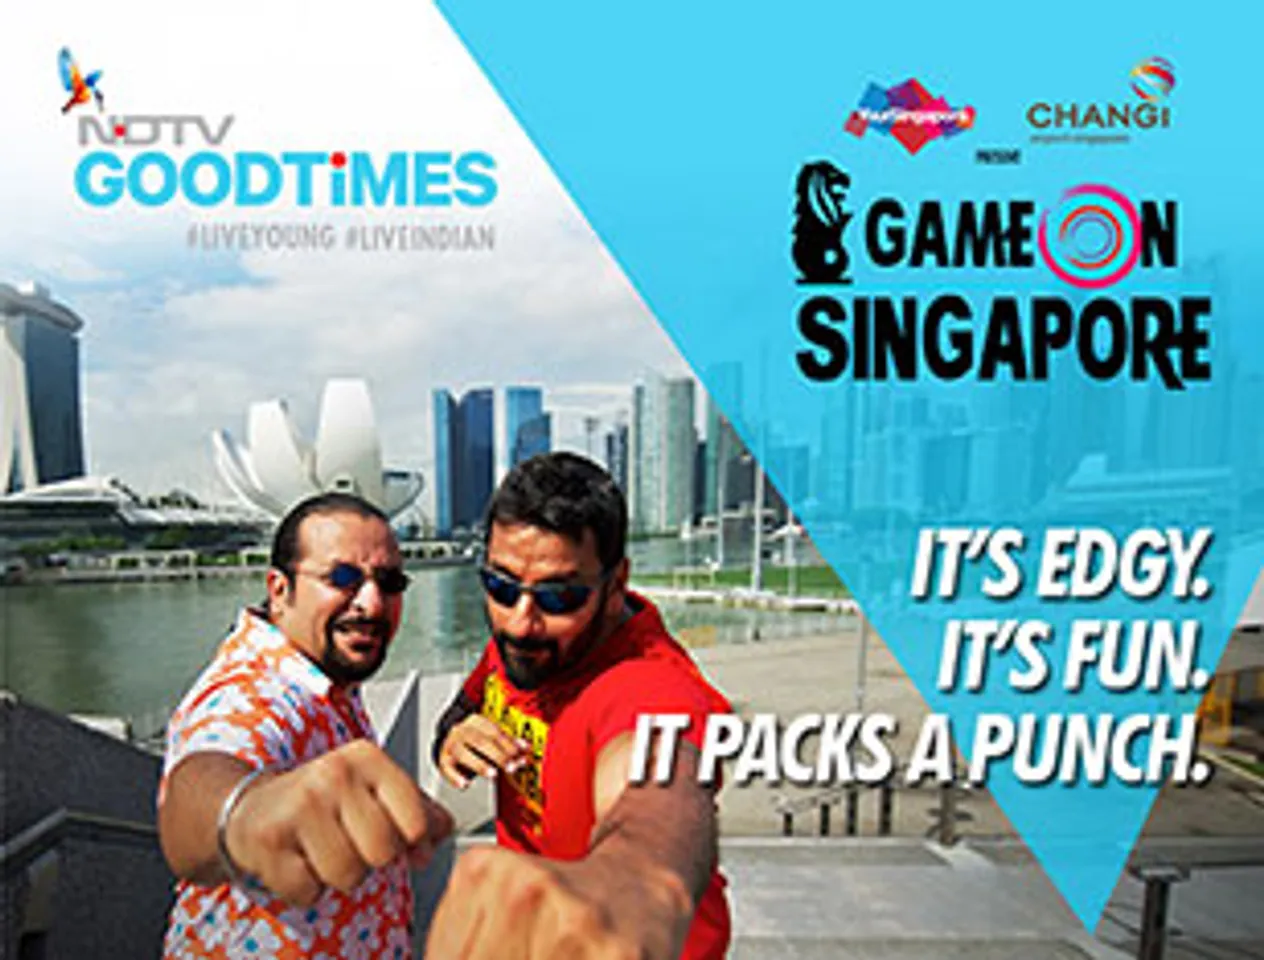 NDTV Good Times to air 'Game On Singapore' from July 24